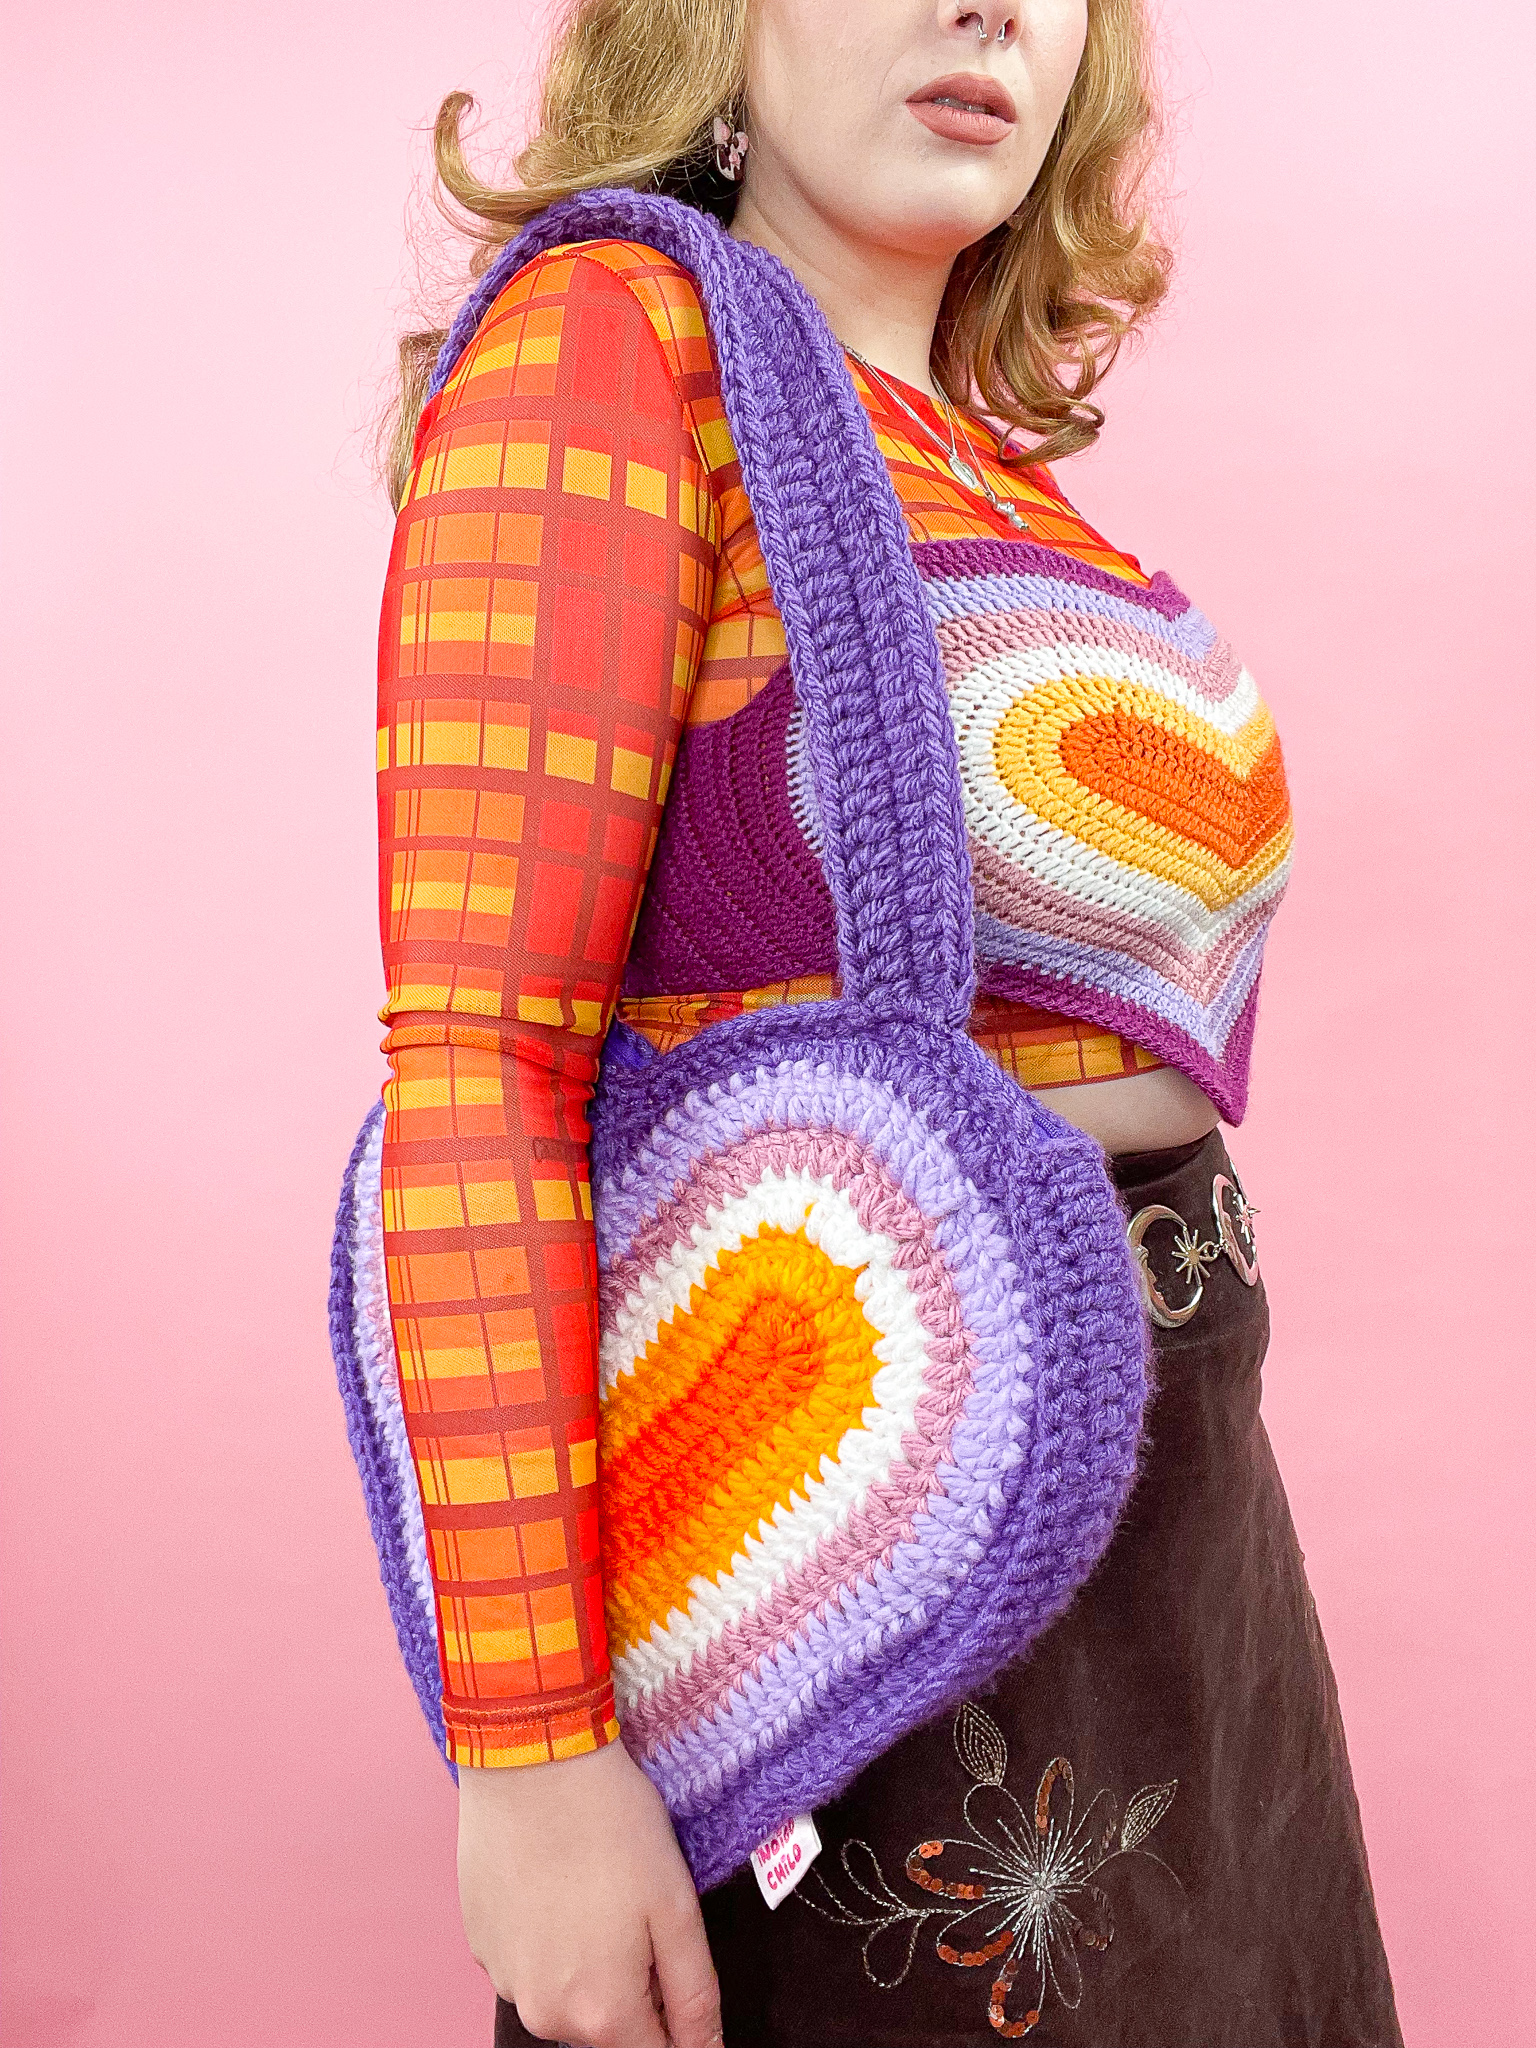 a woman wearing a colorful sweater and a knitted bag